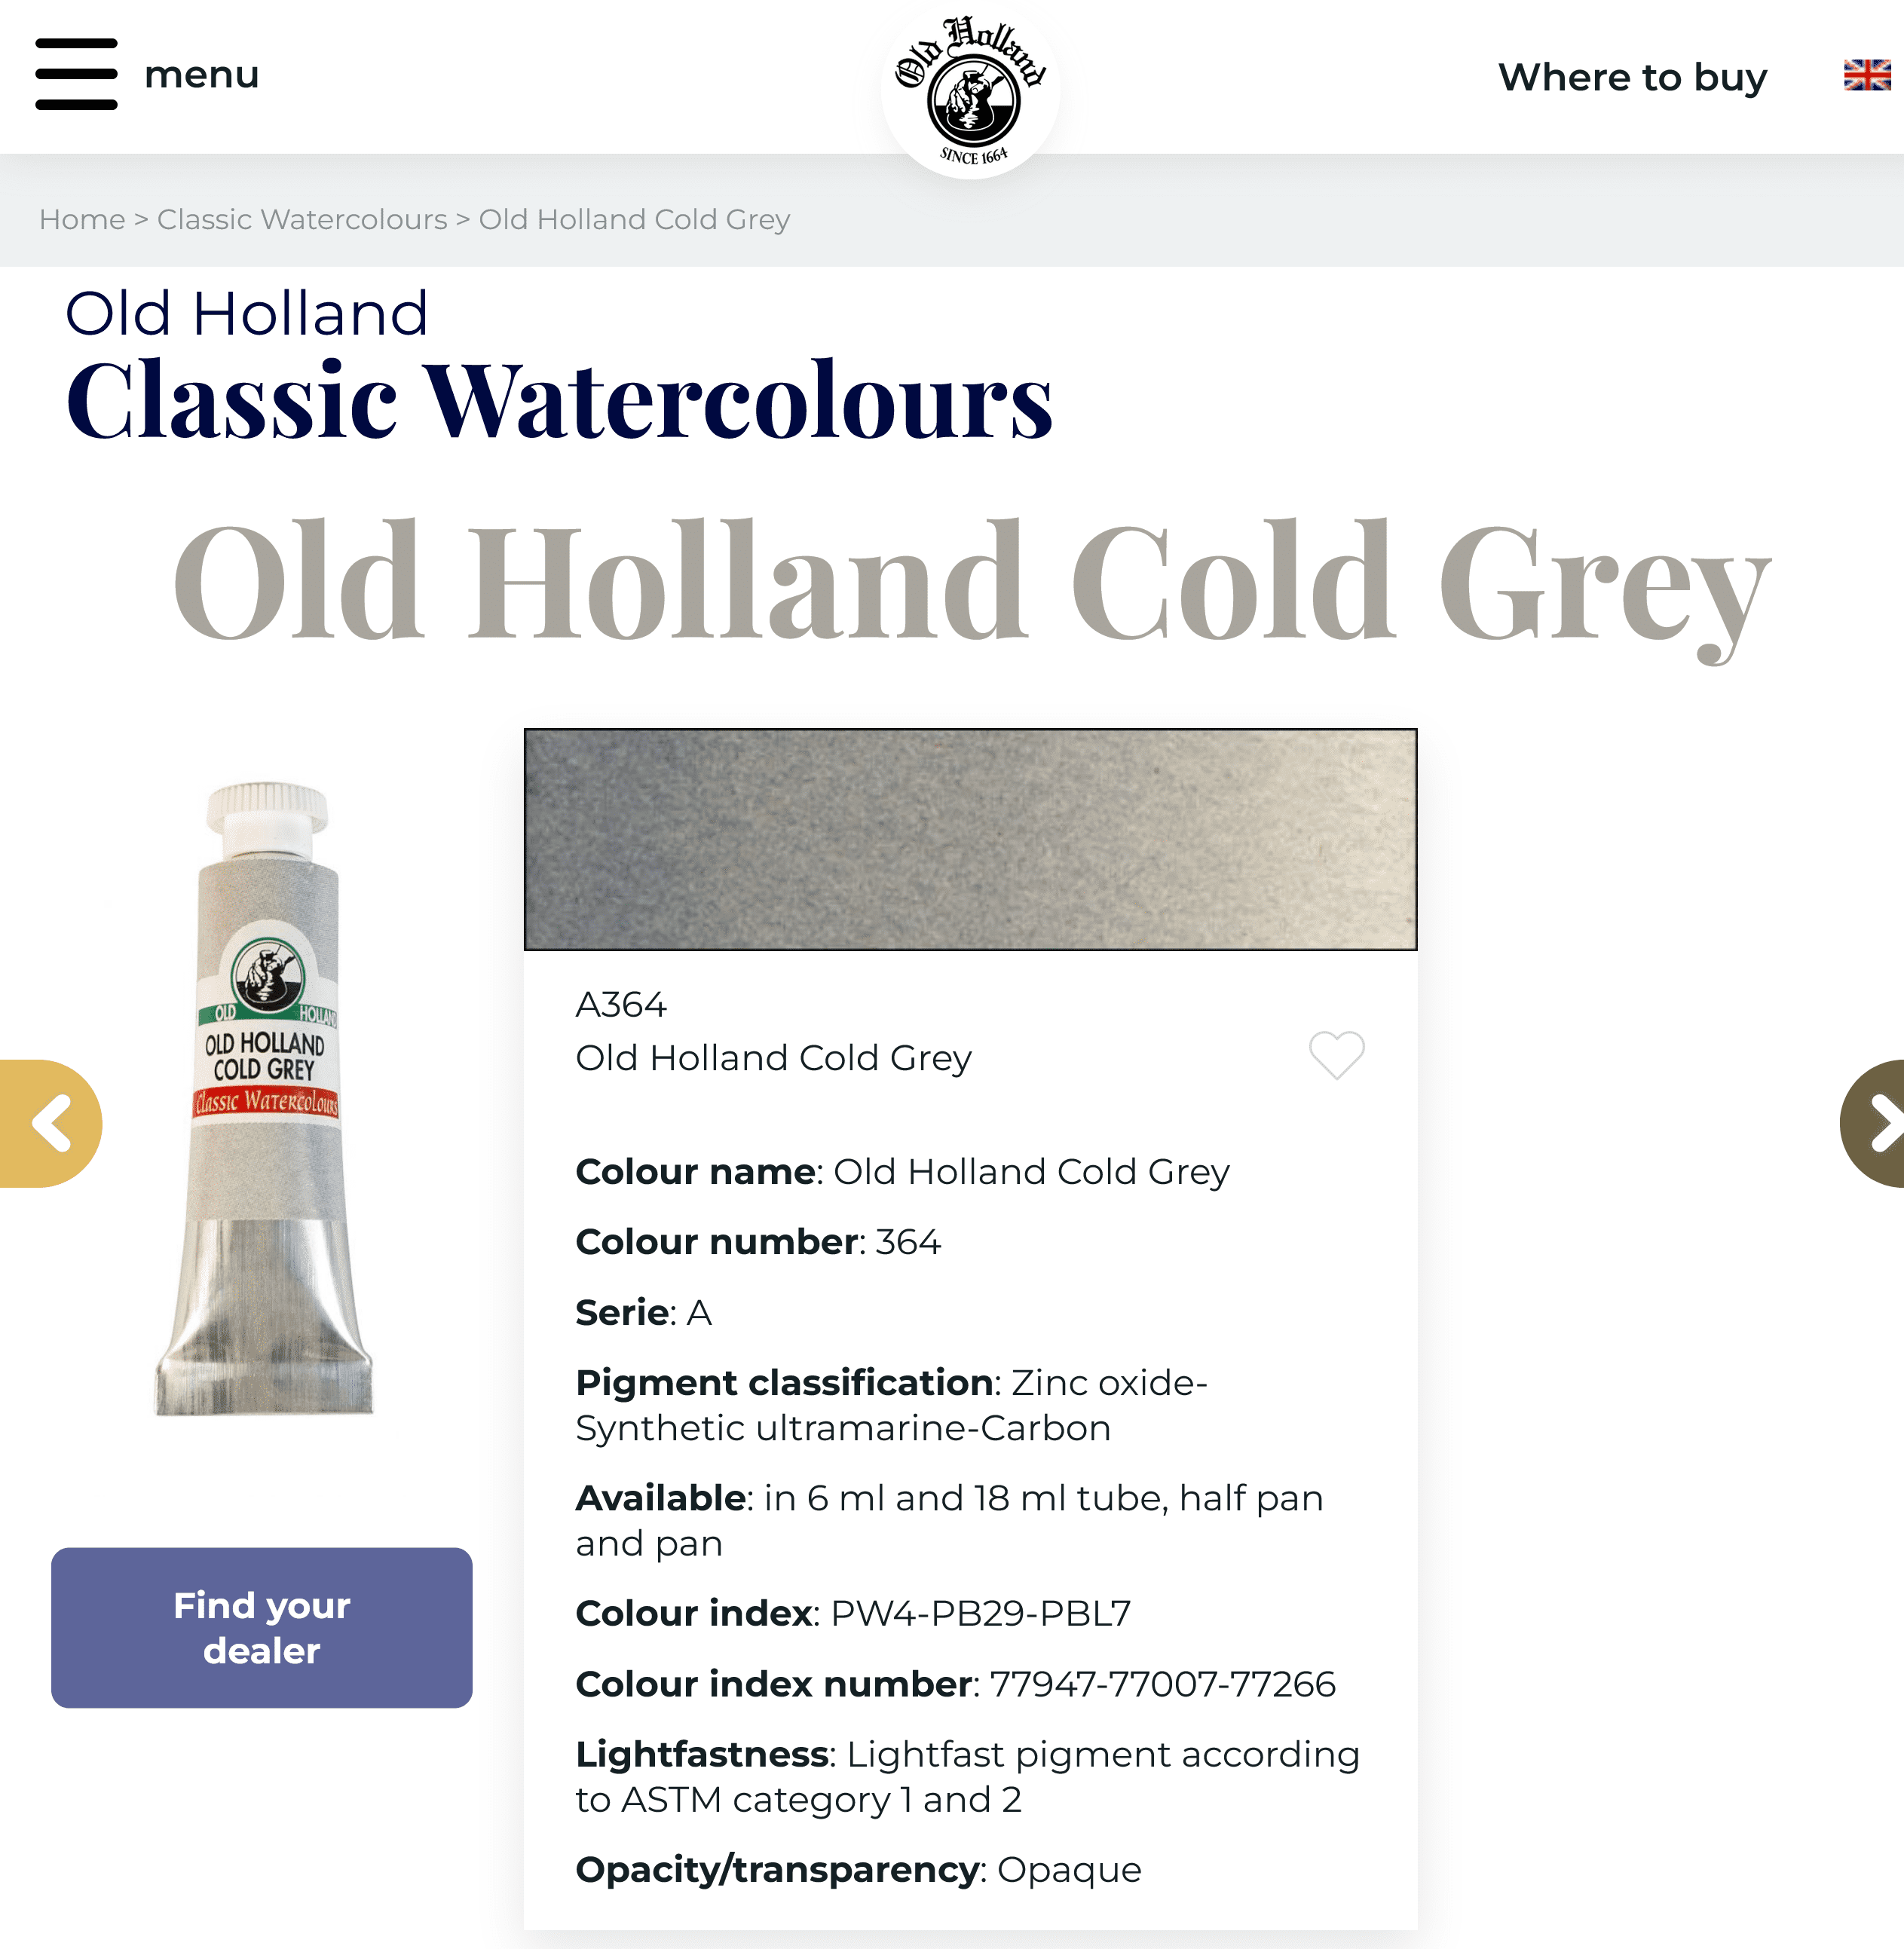 Old Holland cold grey